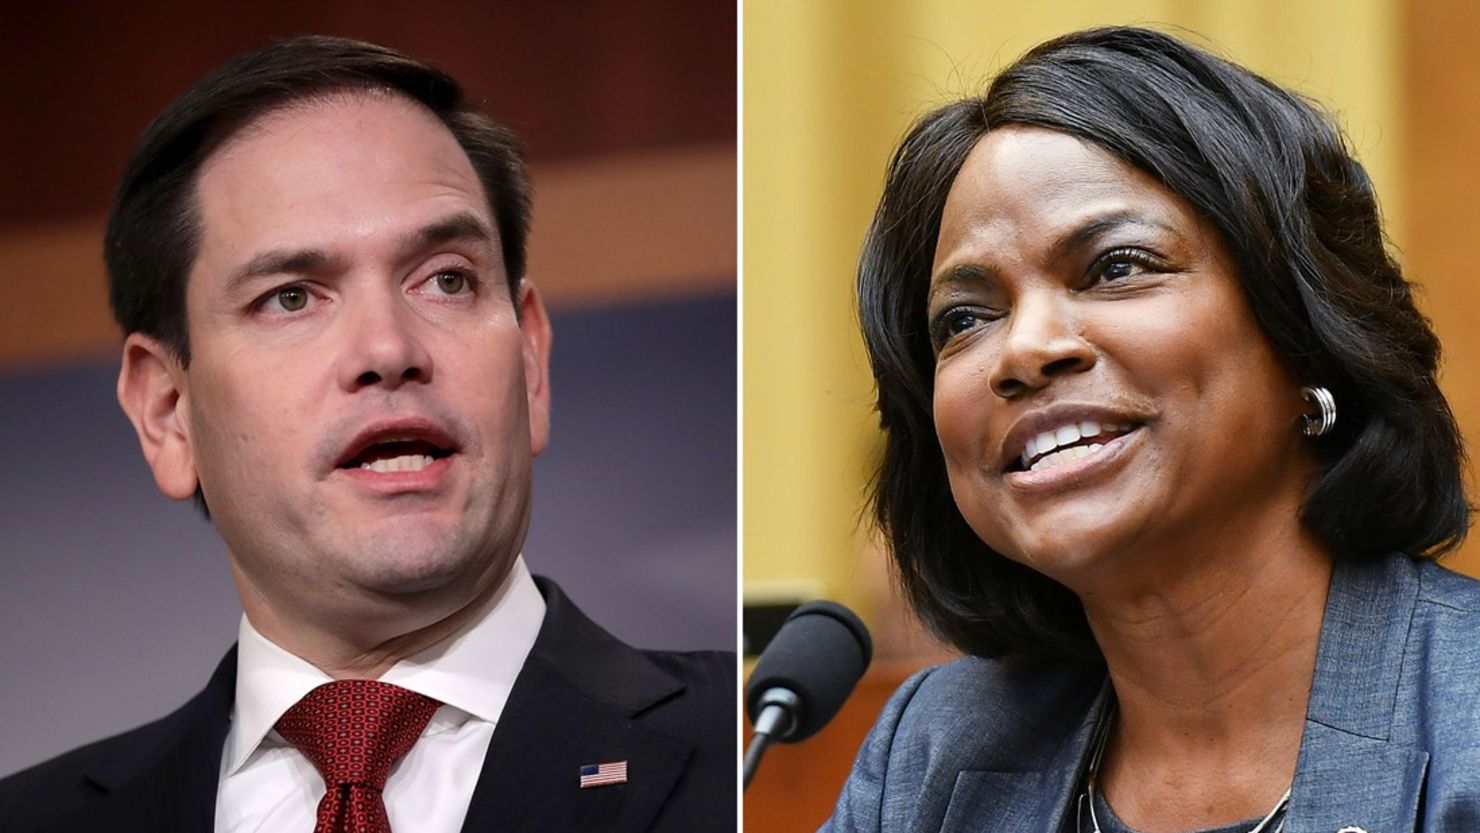 Marco Rubio (L) and Val Demings (R).